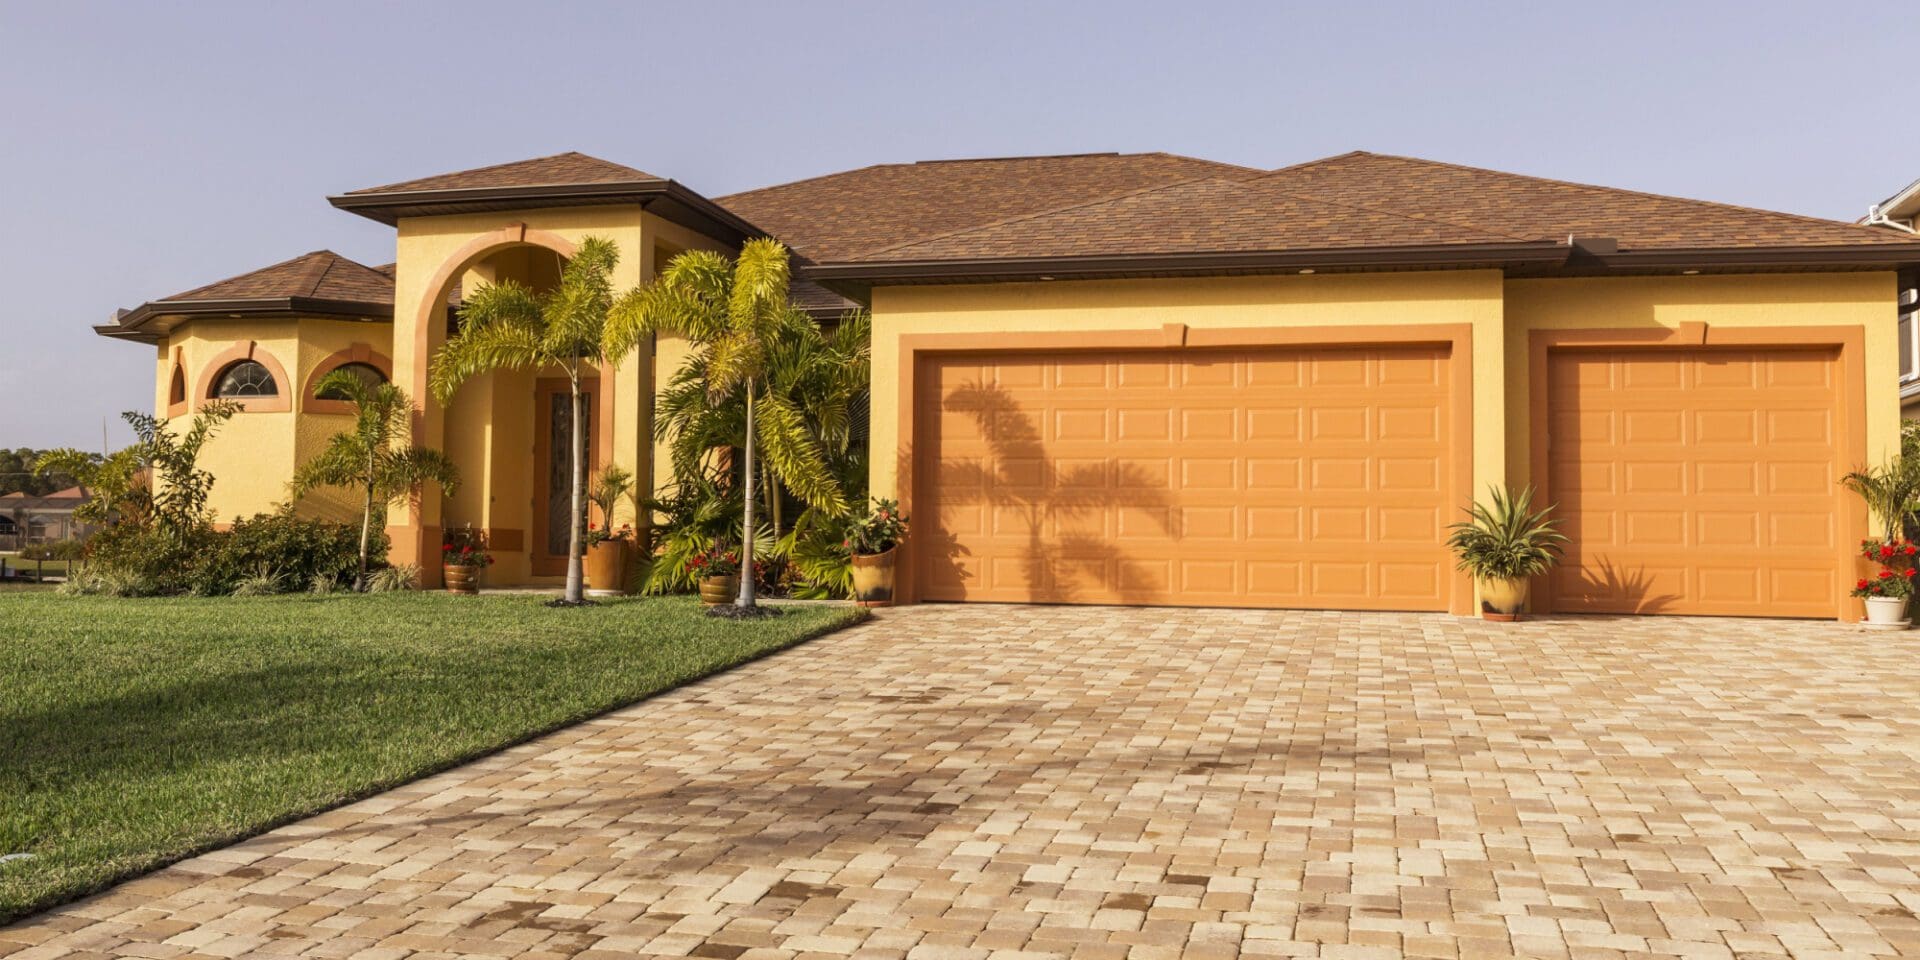 The Best Shingle Roof for Floridians